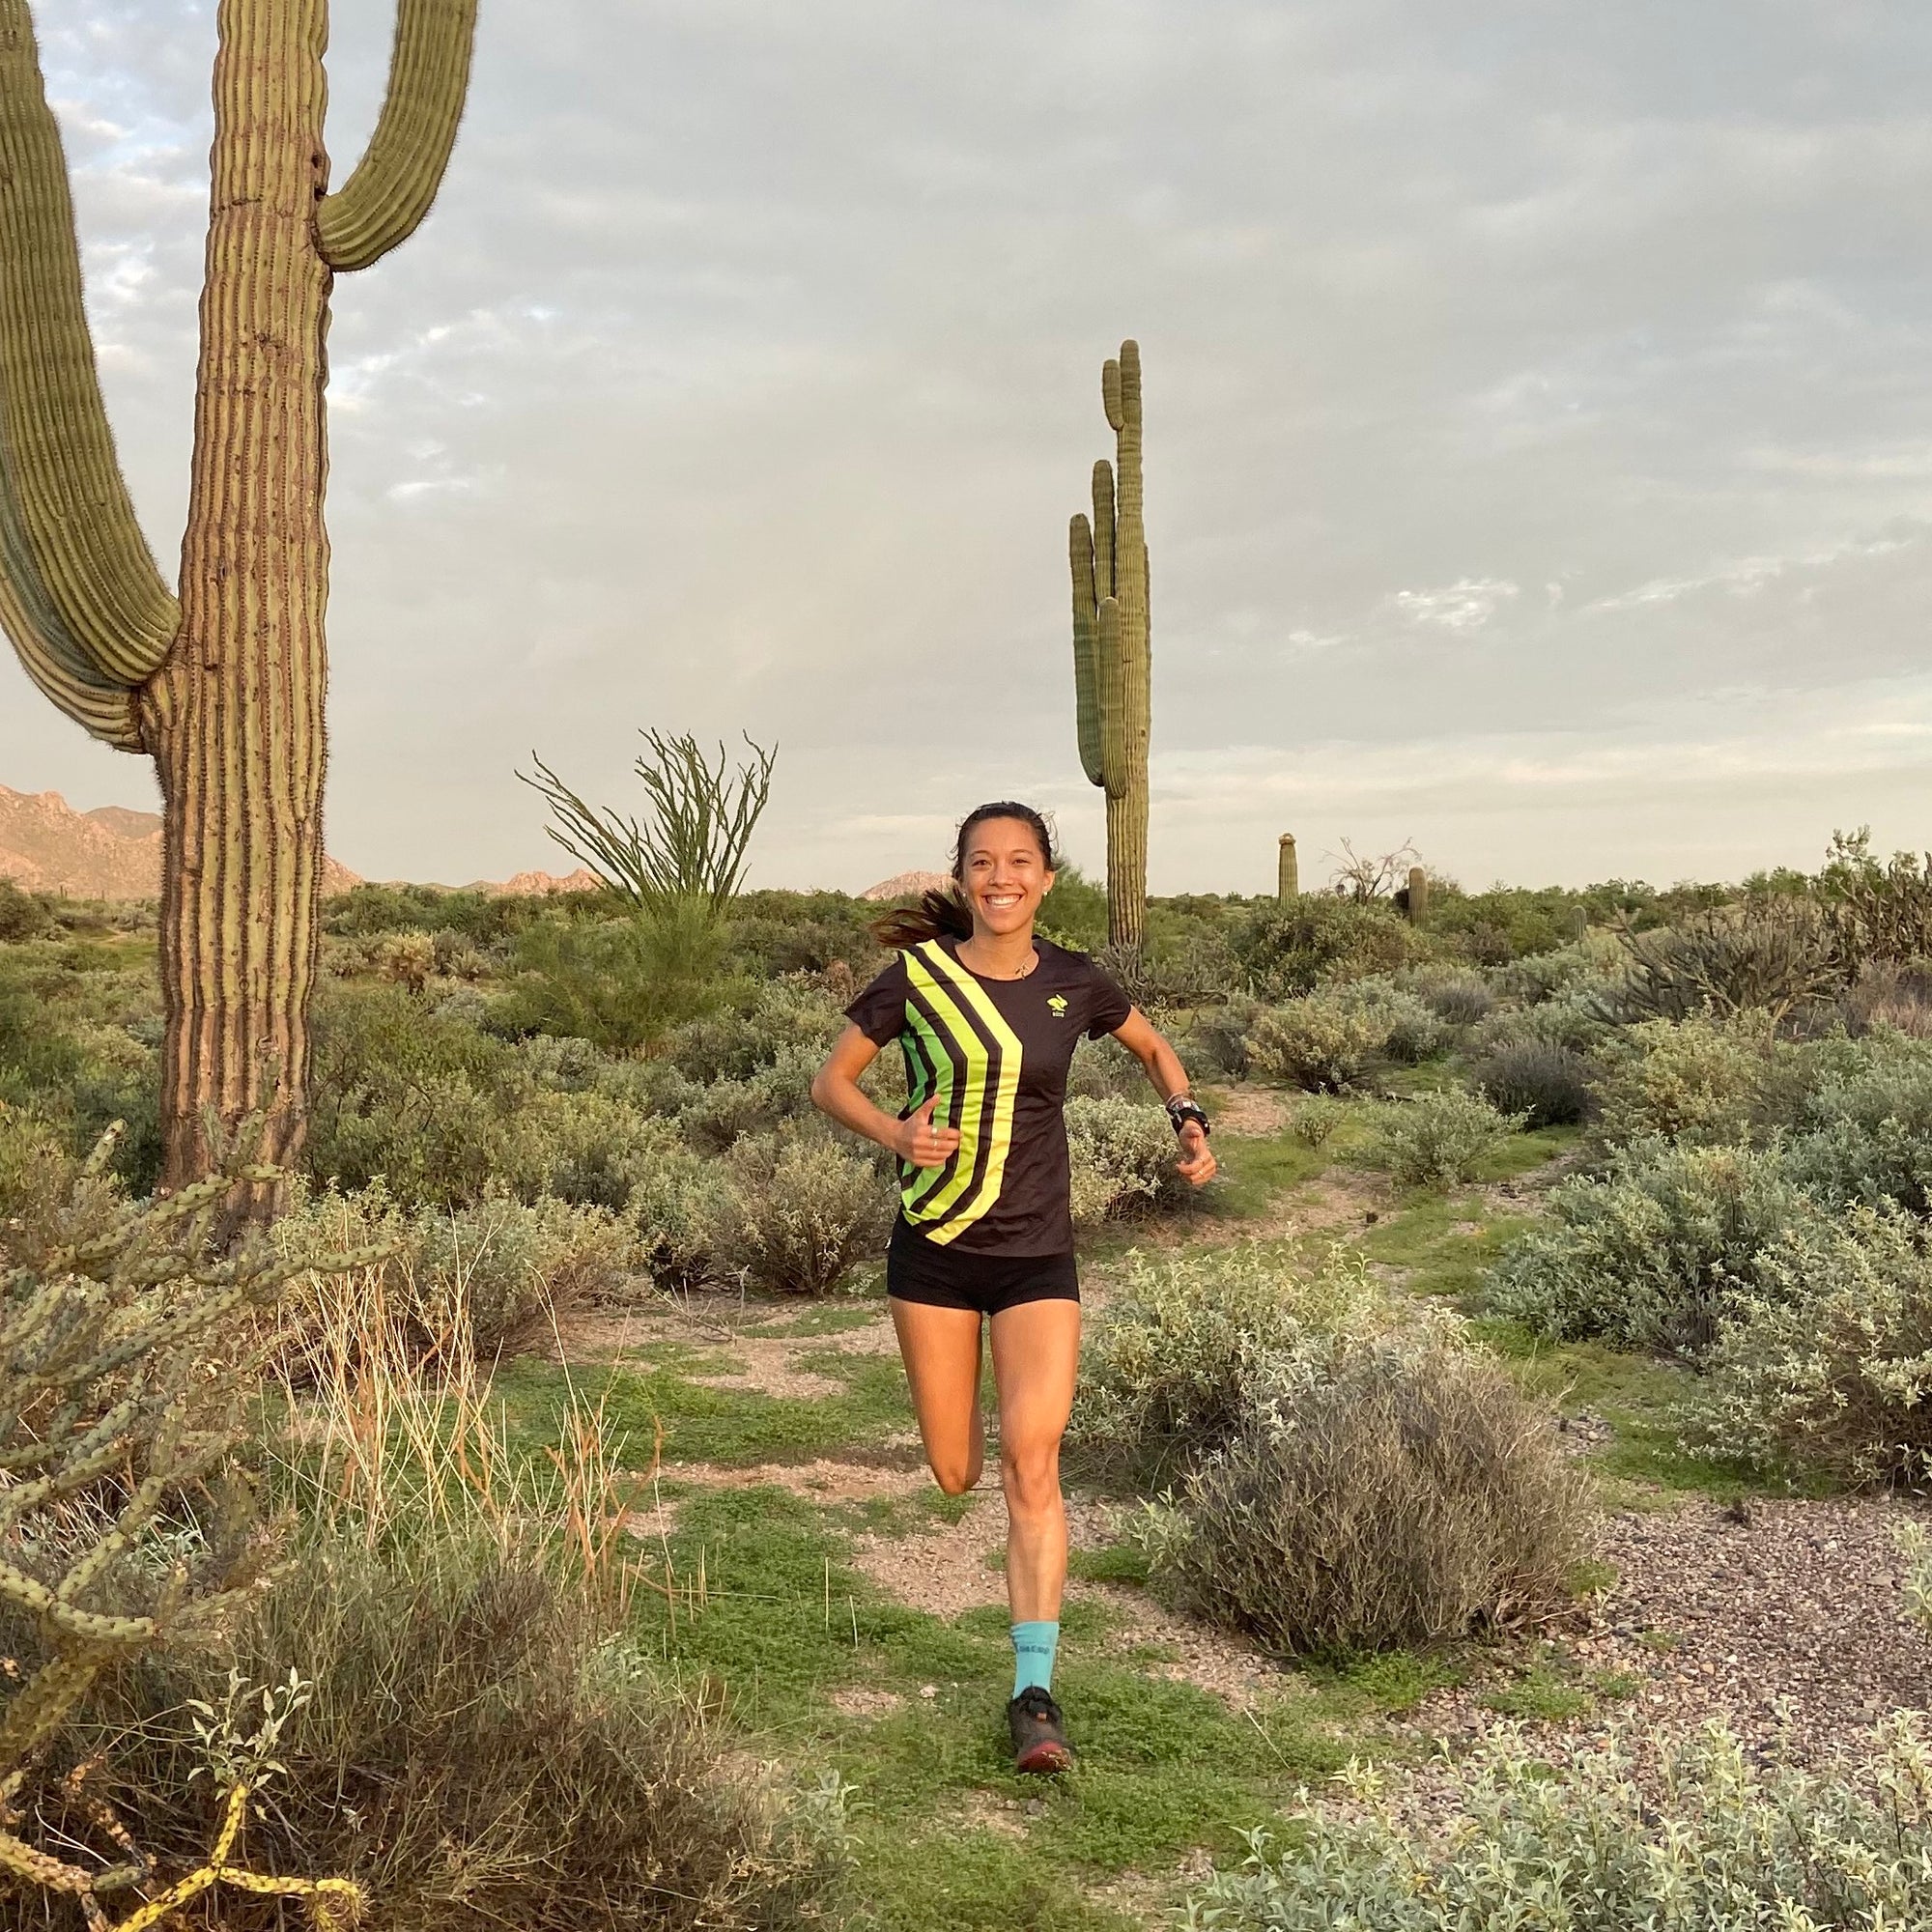 Nicole Lane's running story and balancing training with a big life move